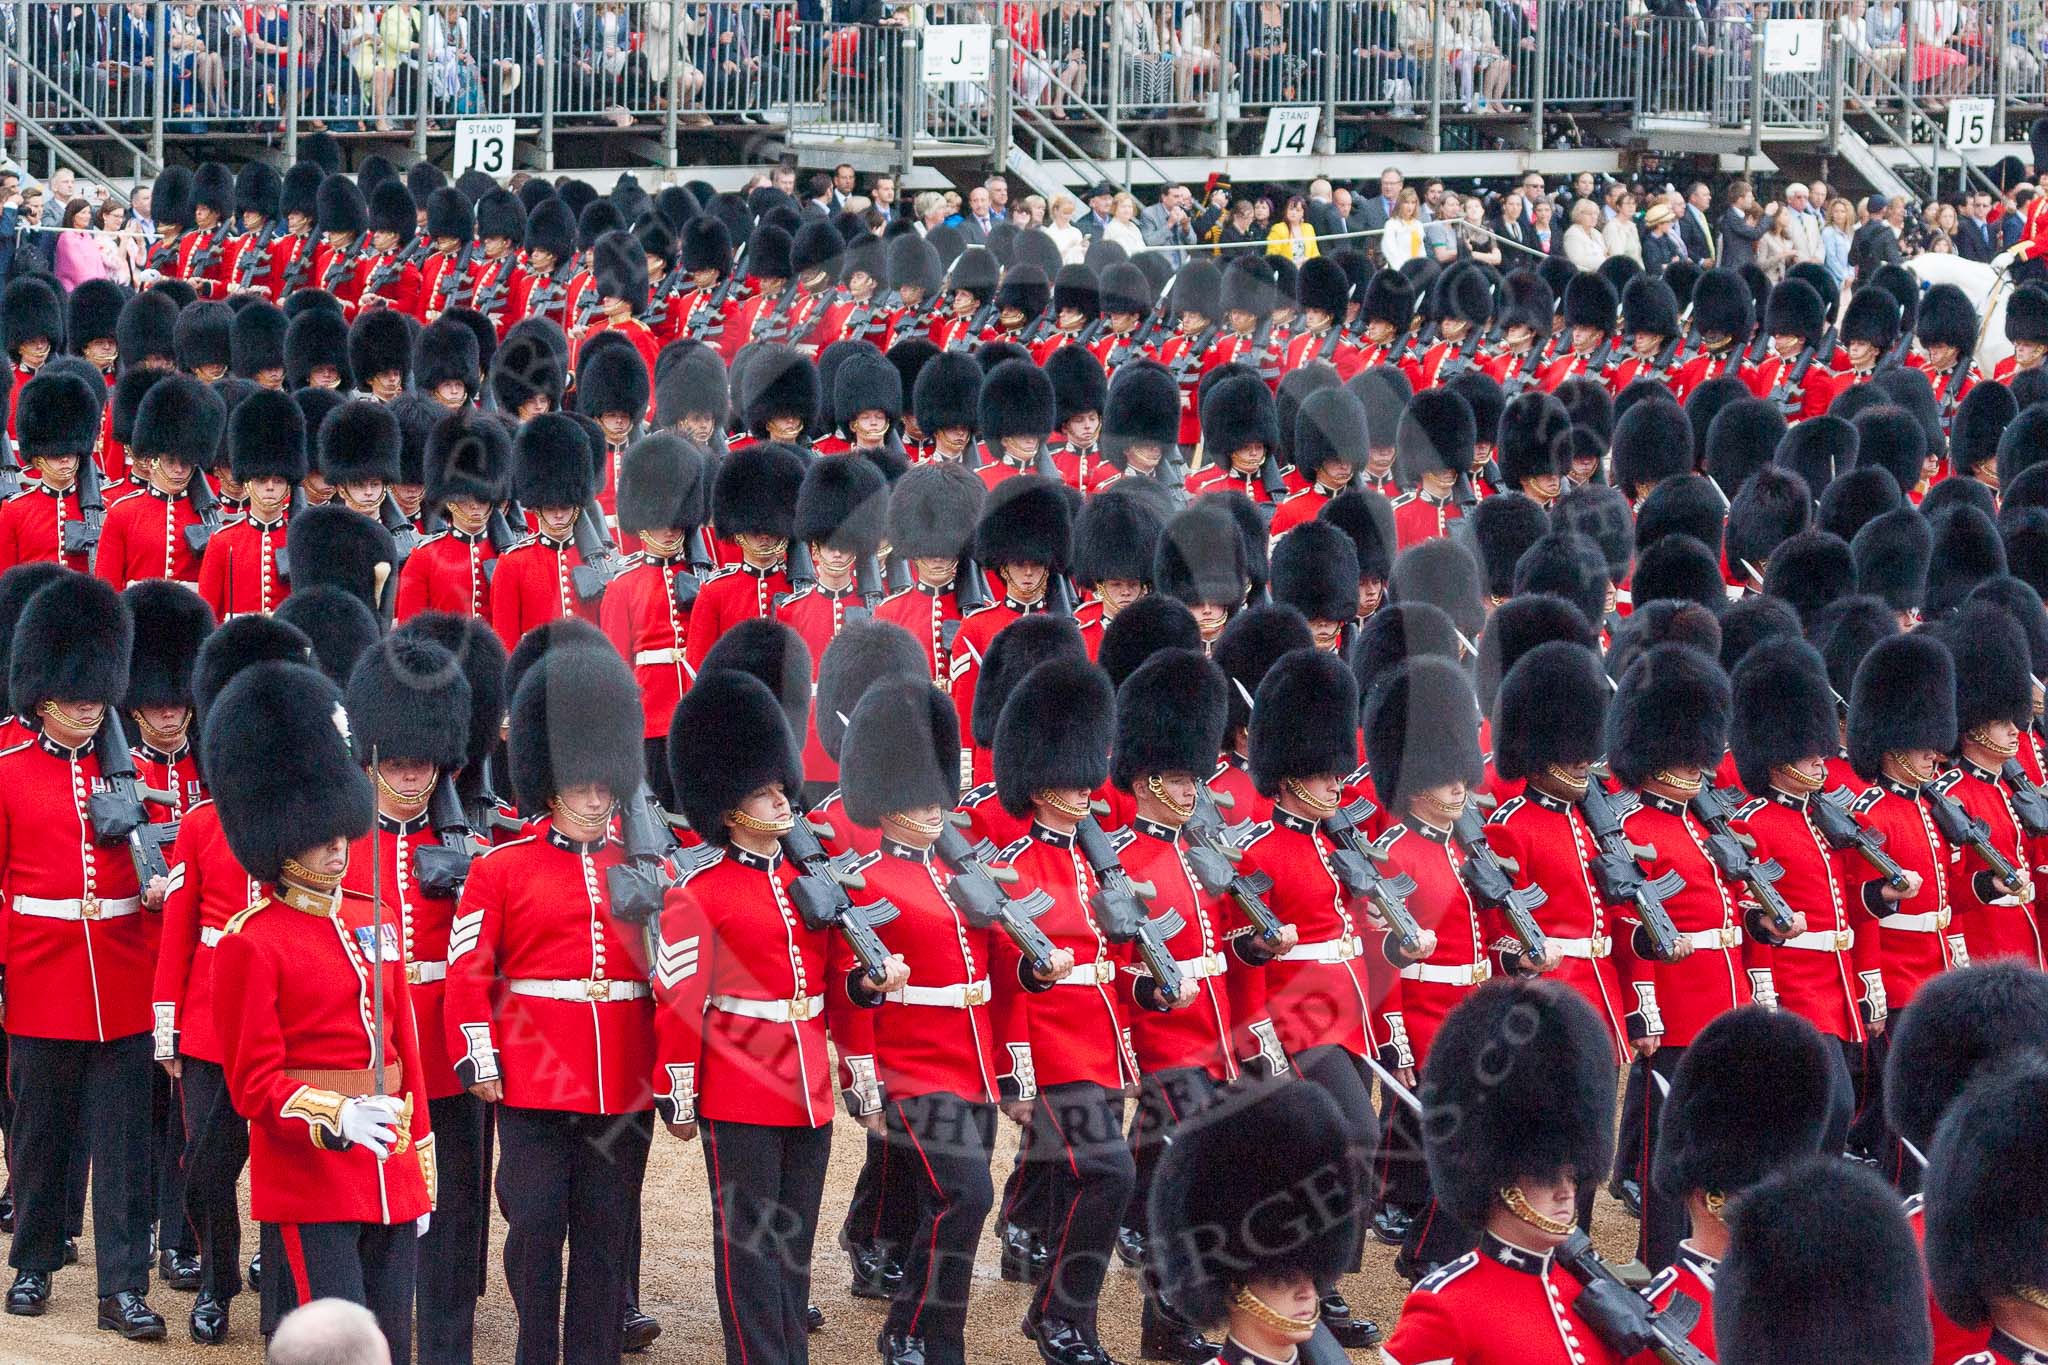 Trooping the Colour 2015. Image #460, 13 June 2015 11:35 Horse Guards Parade, London, UK